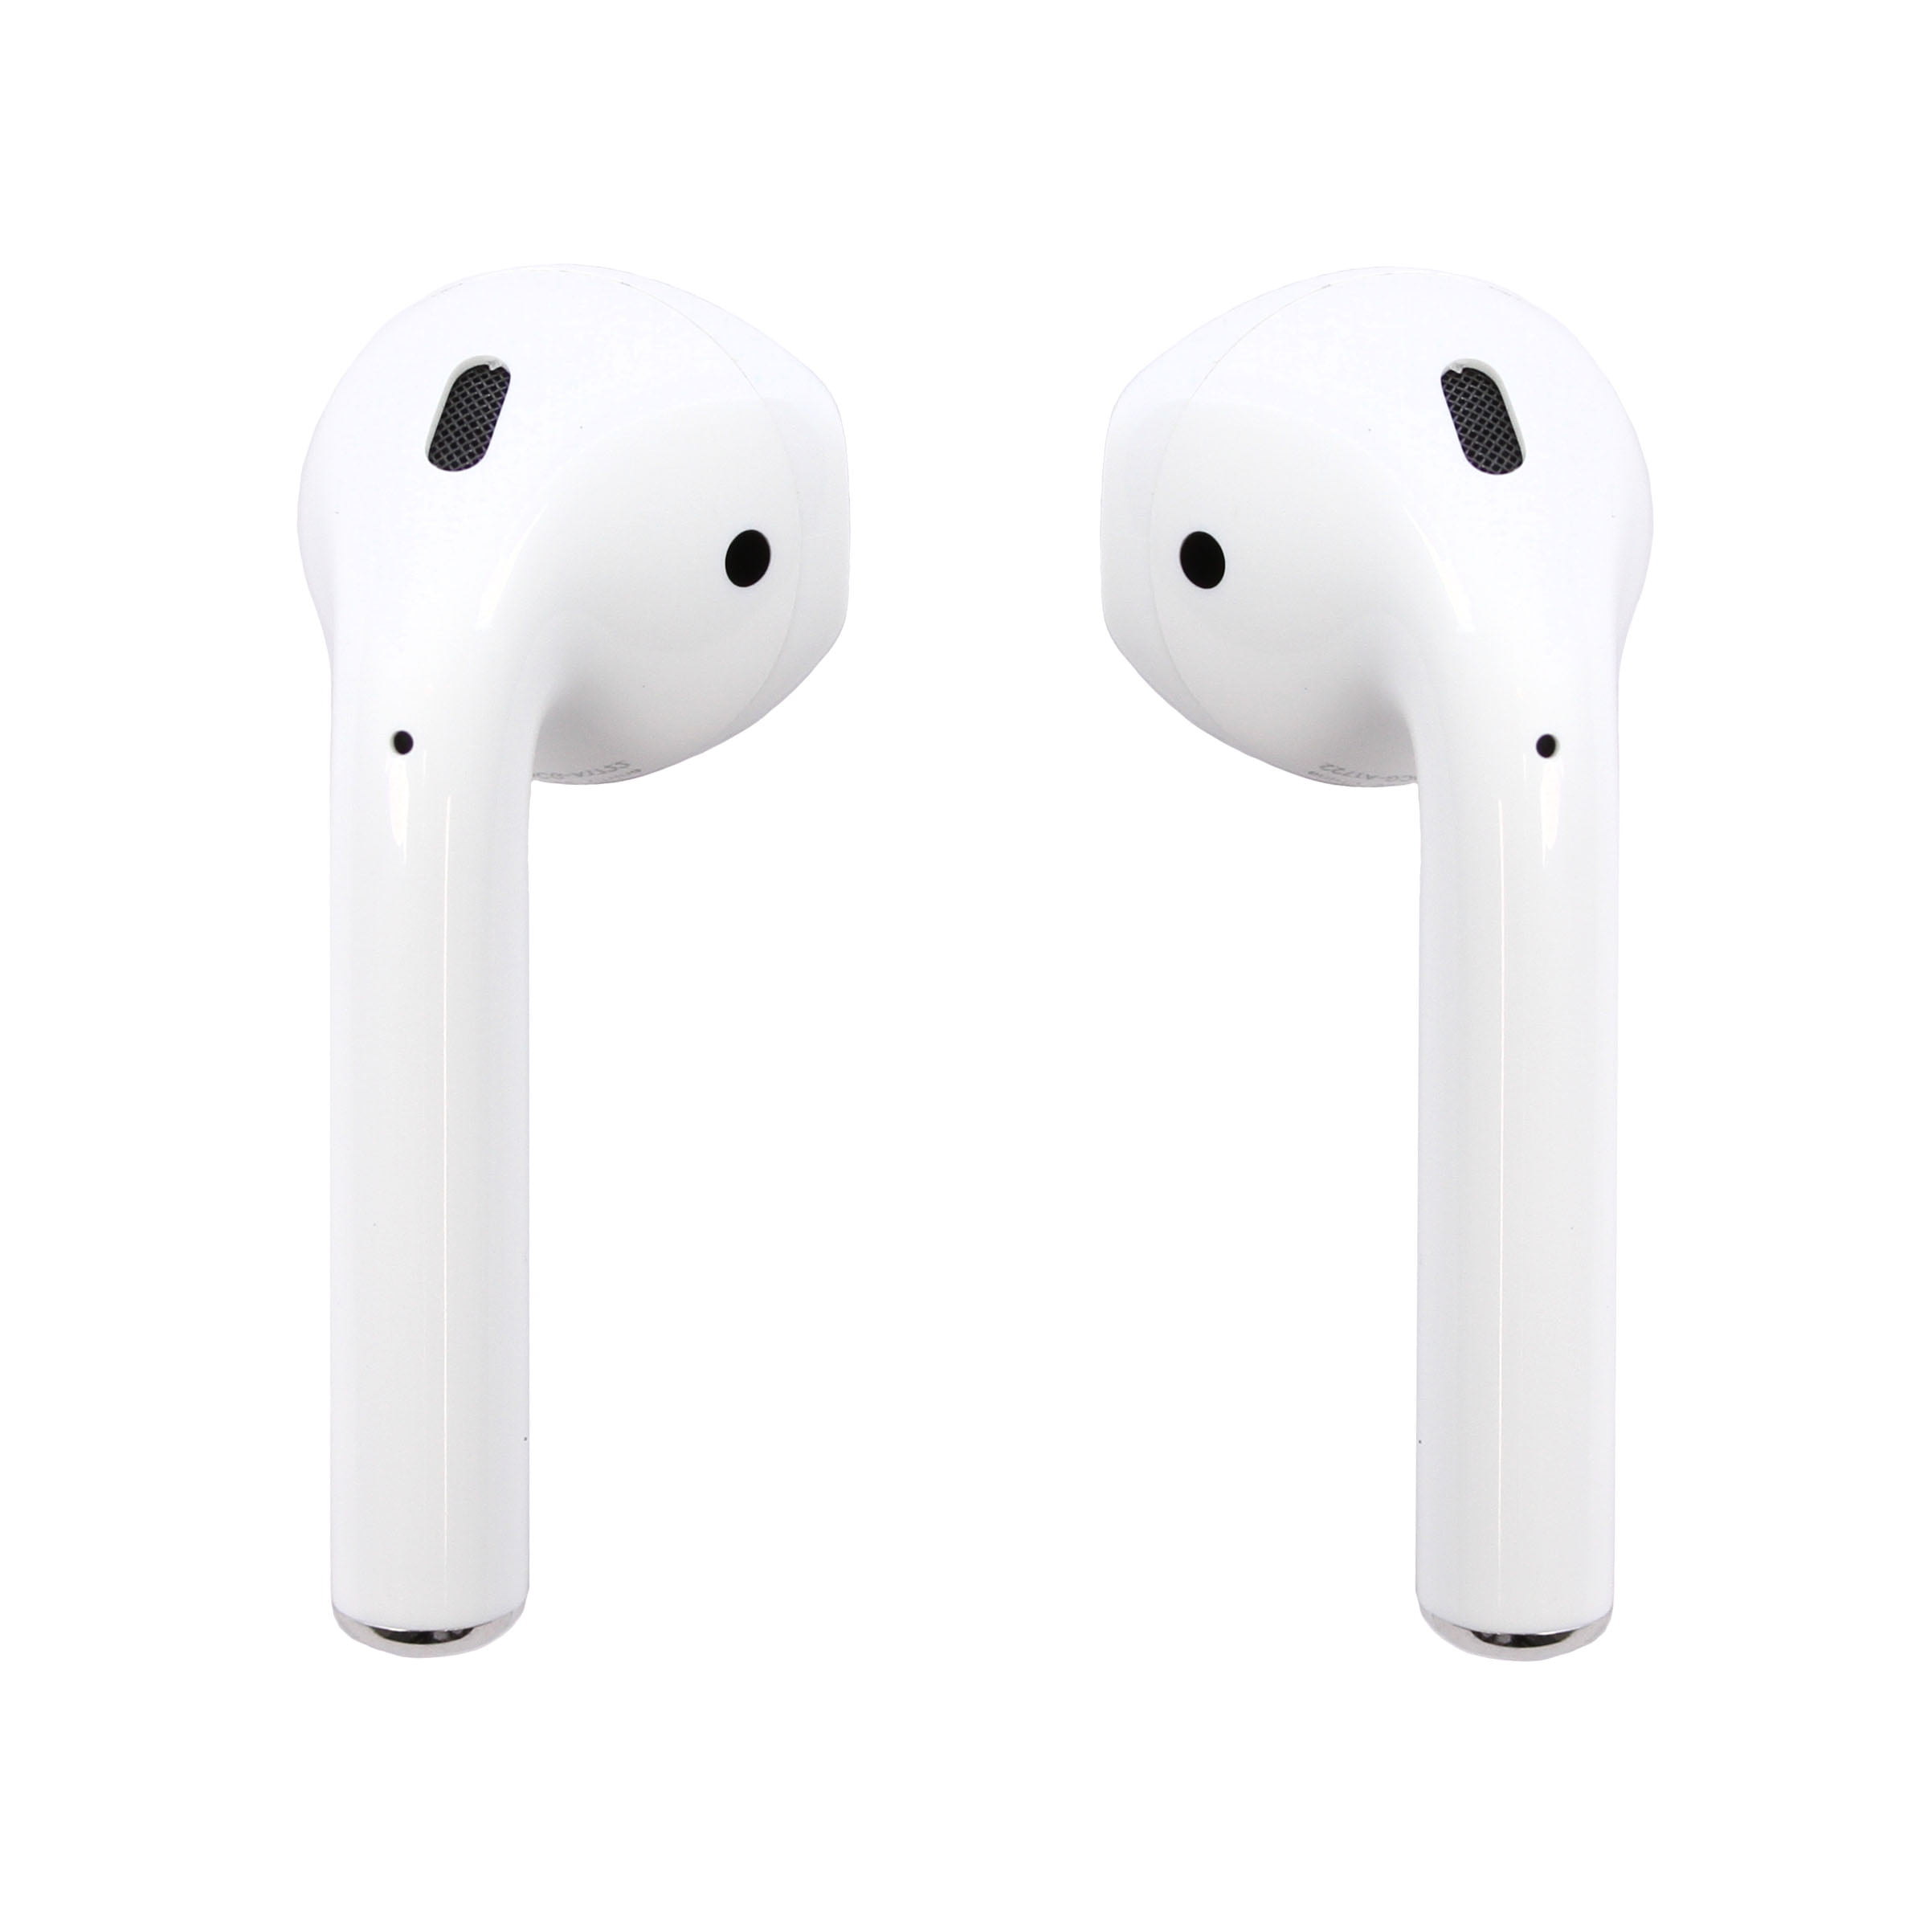 Refurbished) Apple AirPods 2 with Charging Case - White - Walmart.com